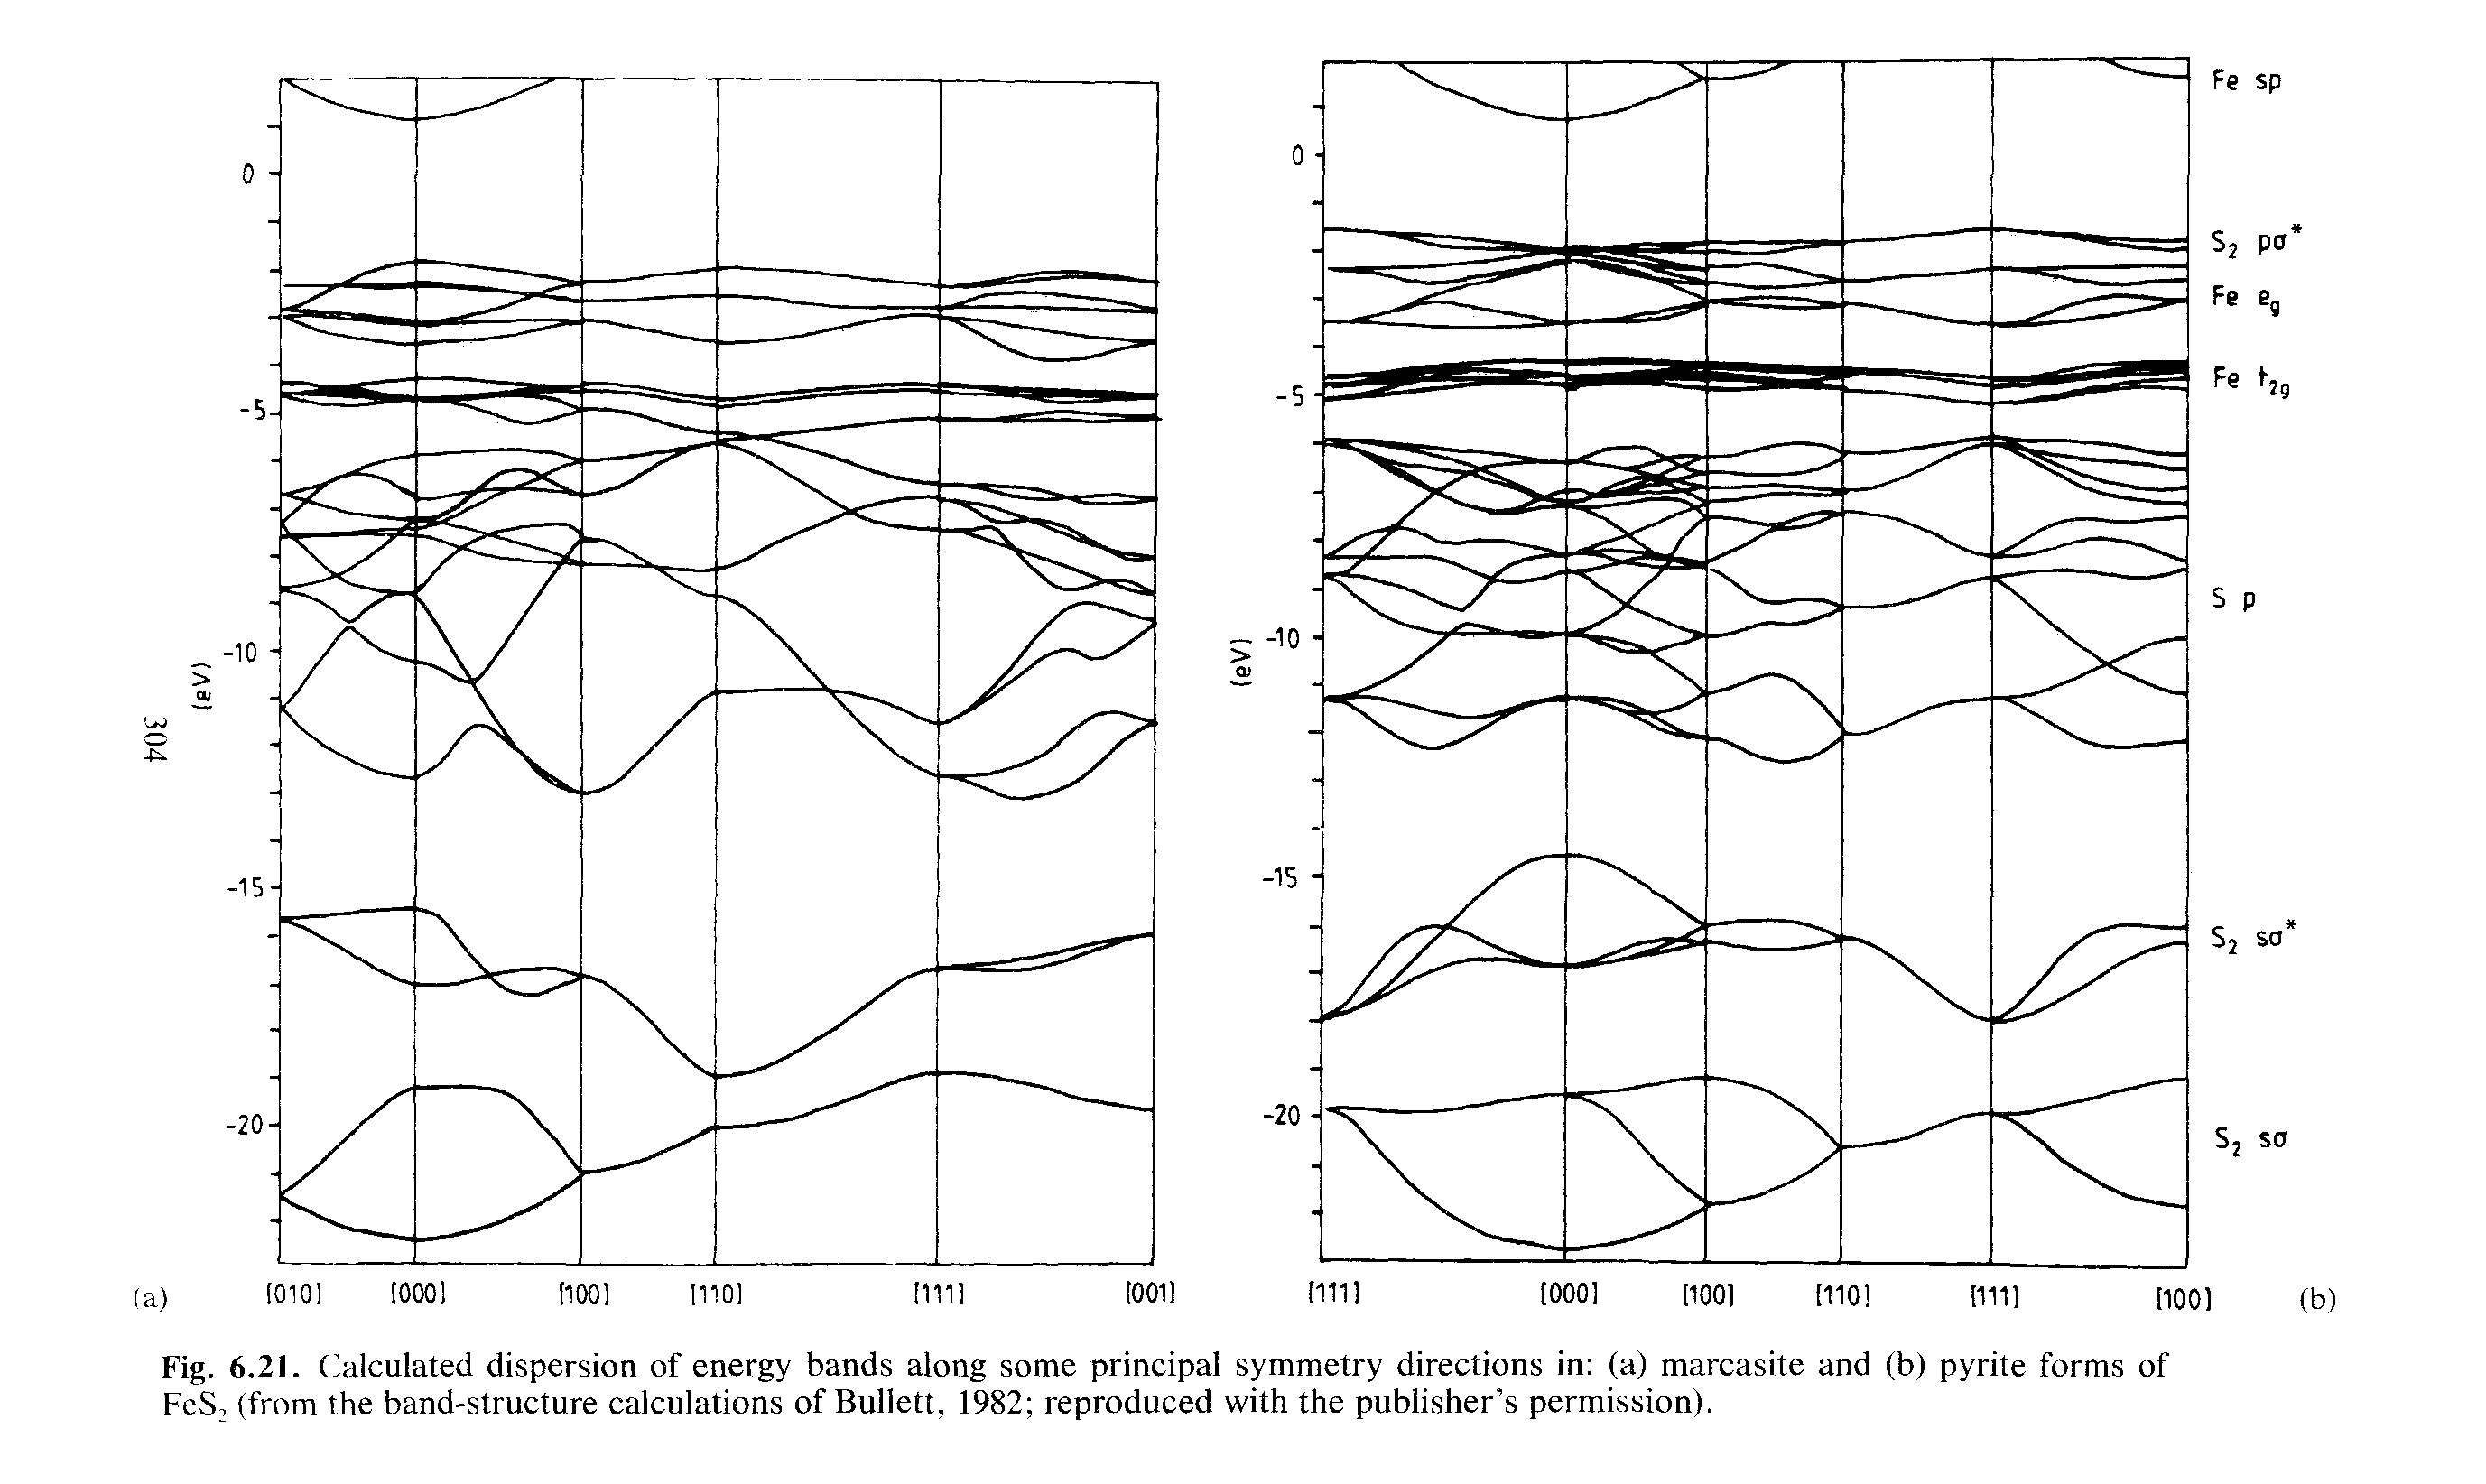 Fig. 6.21. Calculated dispersion of energy bands along some principal symmetry directions in (a) marcasite and (b) pyrite forms of FeS, (from the band-structure calculations of Bullett, 1982 reproduced with the publisher s permission).